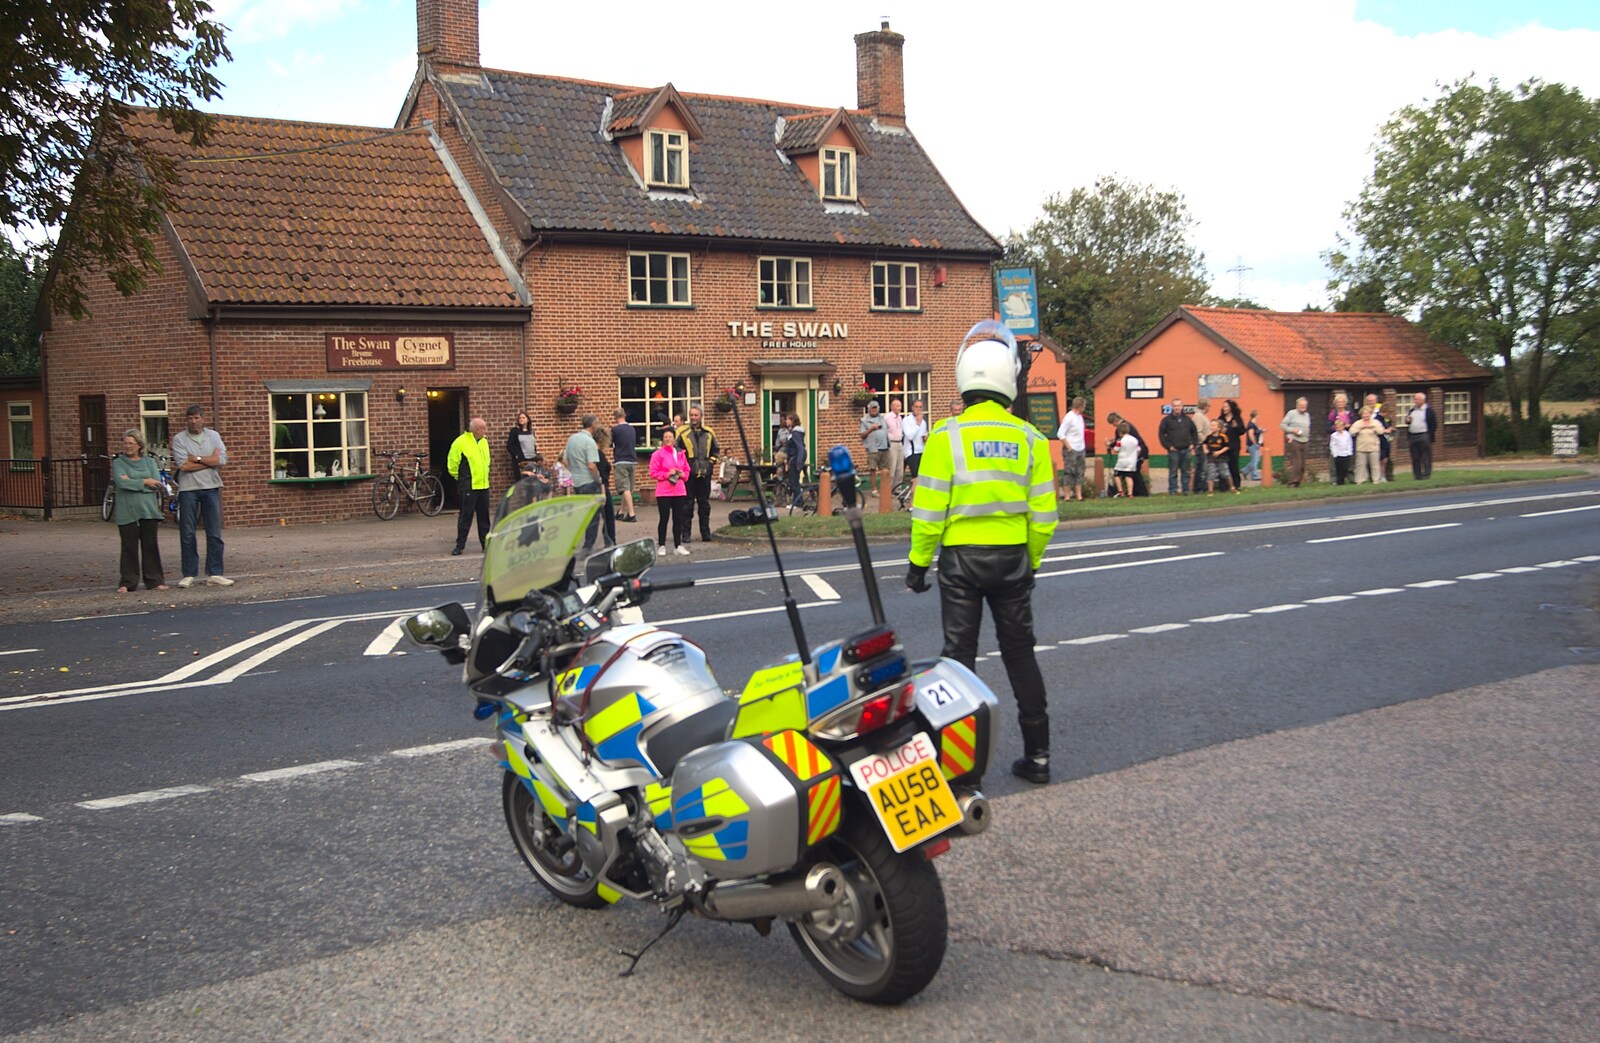 The rozzers block the road off from The Tour of Britain, Brome, Suffolk - 17th September 2011